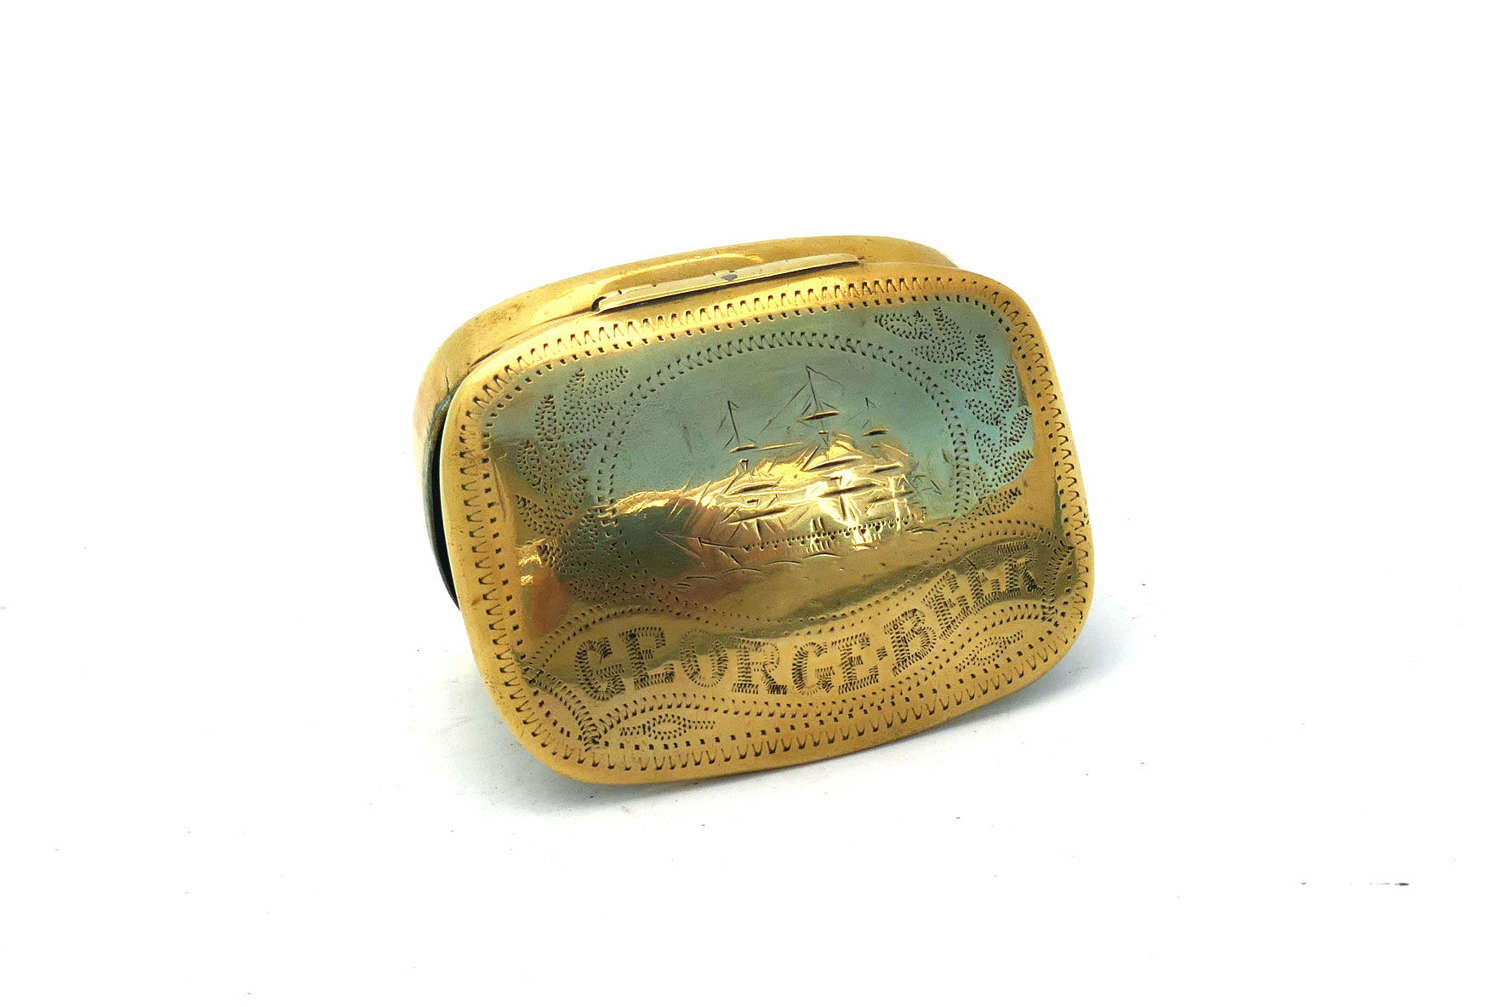 Antique Metalware 19thc Brass Sailor's Snuff Box With Ship Engraving.